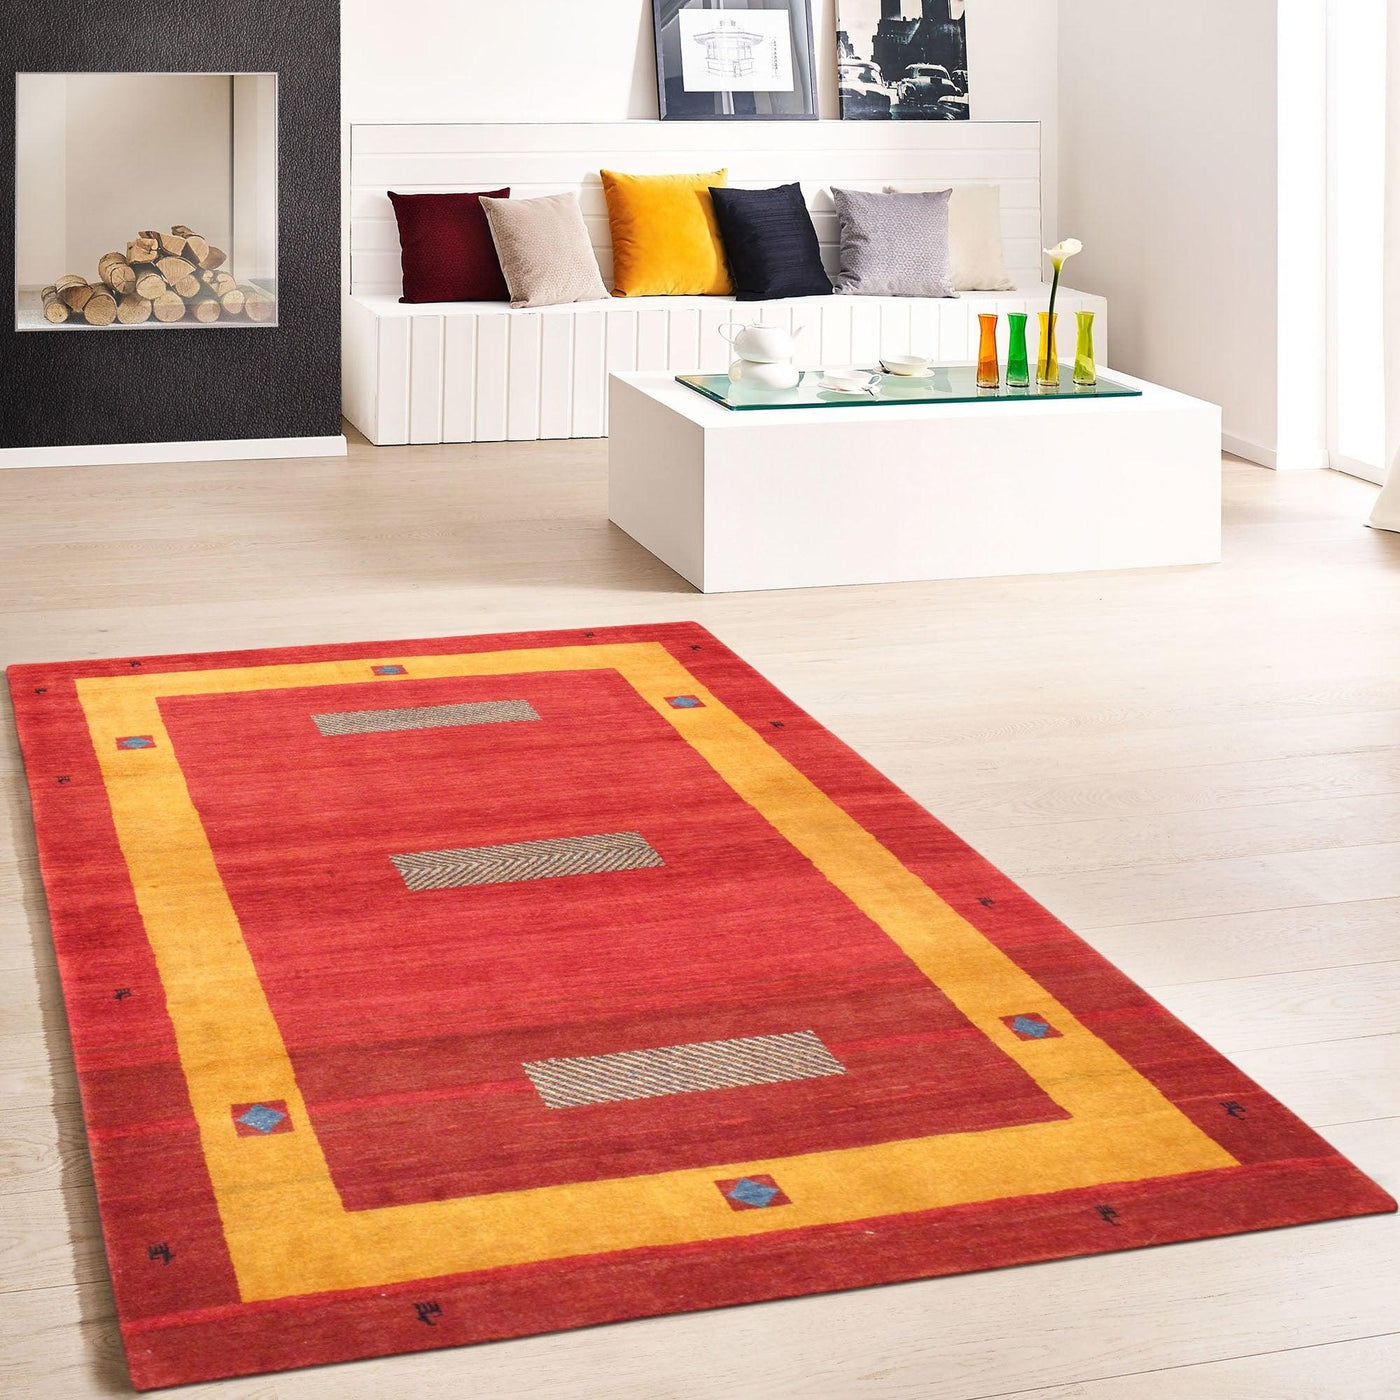 Canvello Persian Gabbeh Red And Yellow Rugs - 4' X 6'2"